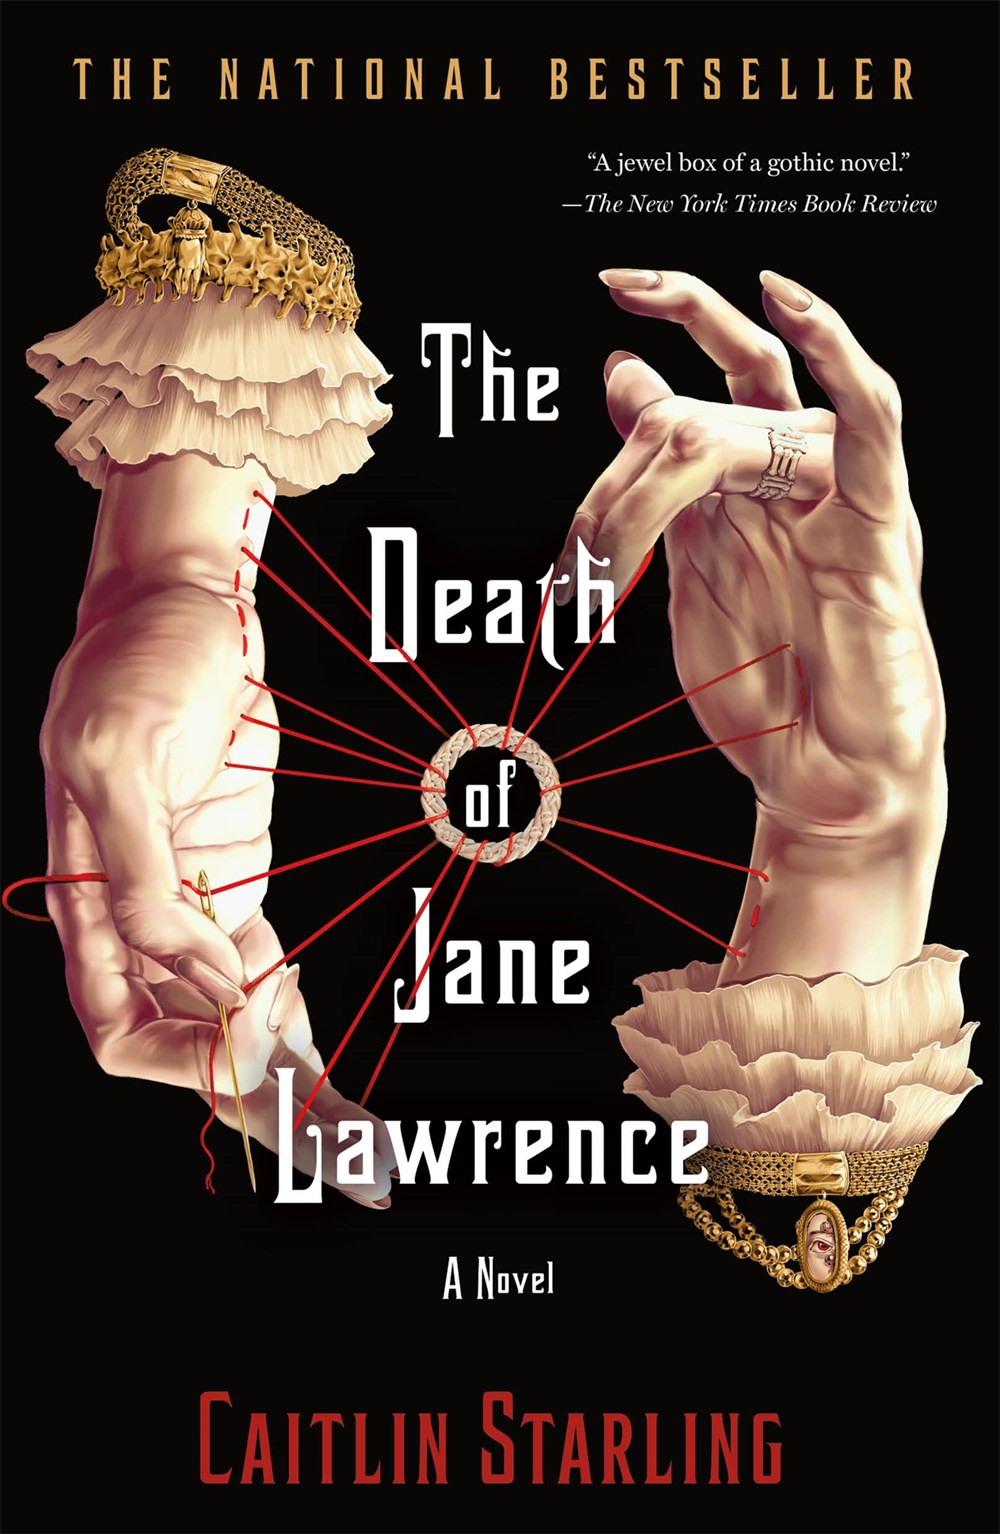 The Death of Jane Lawrence by Caitlin Starling